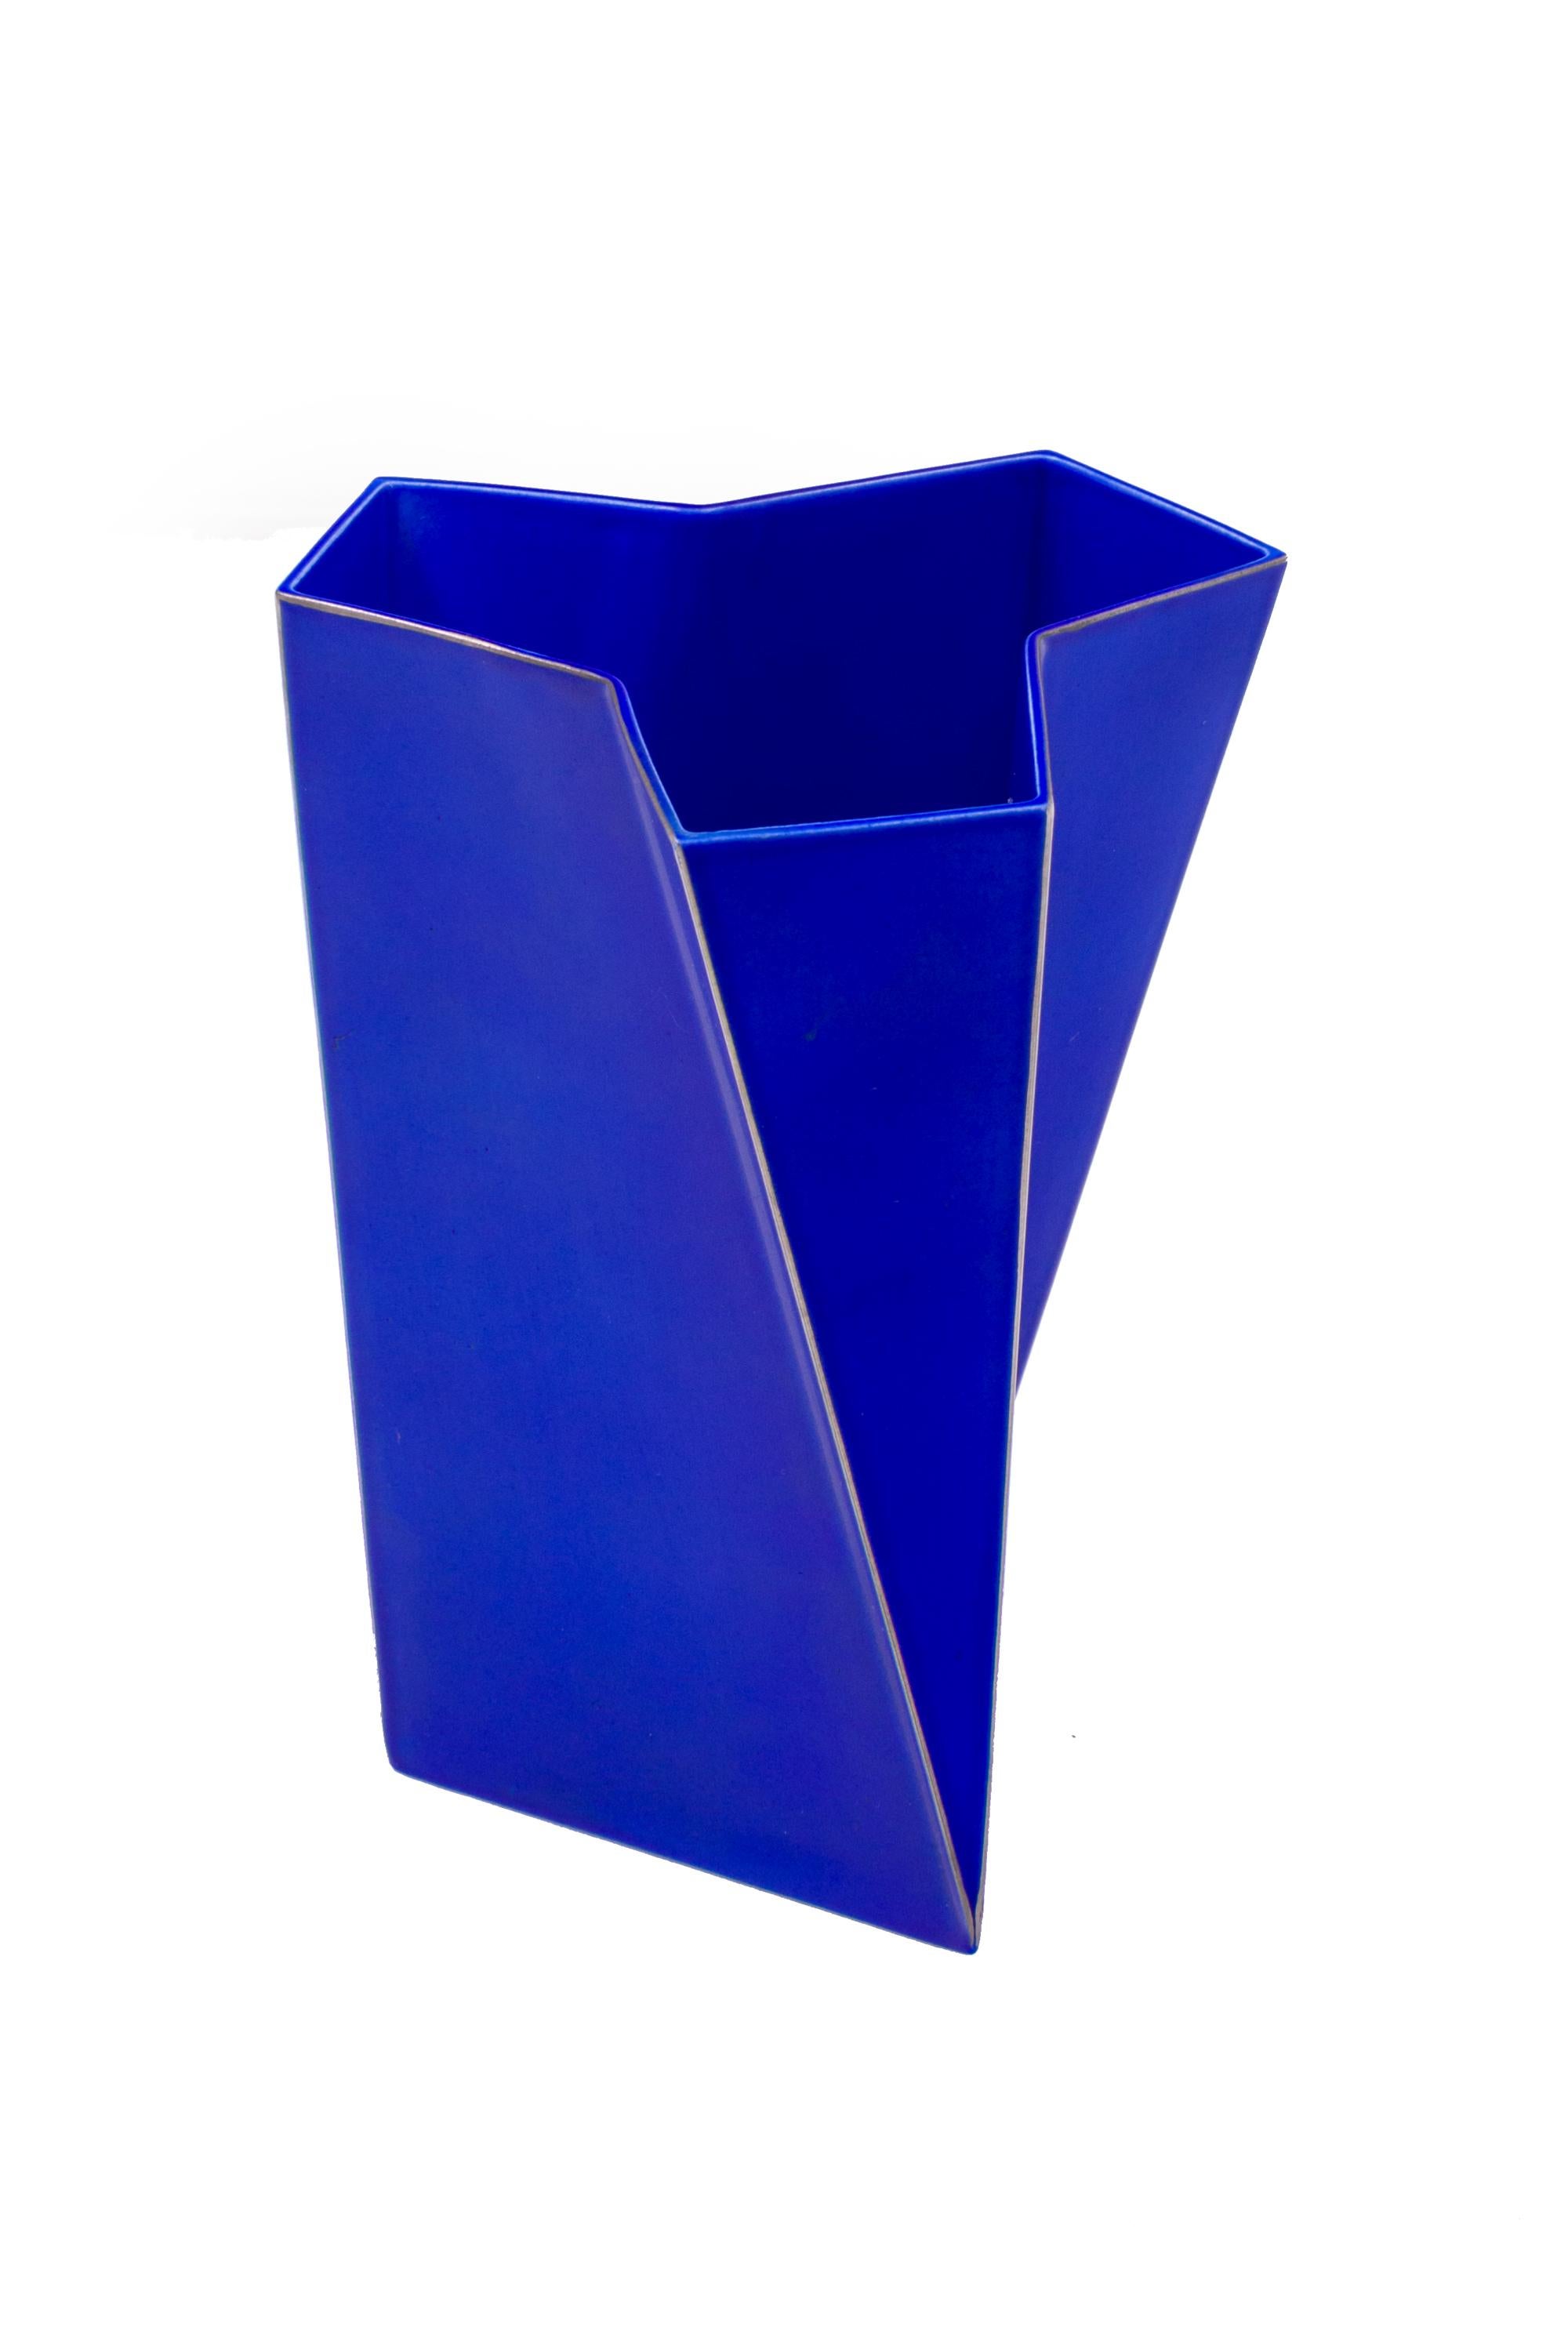 An incredibly striking intense blue vase. A wonderful form reminiscent of the Art Deco period with Post Modernist influences.